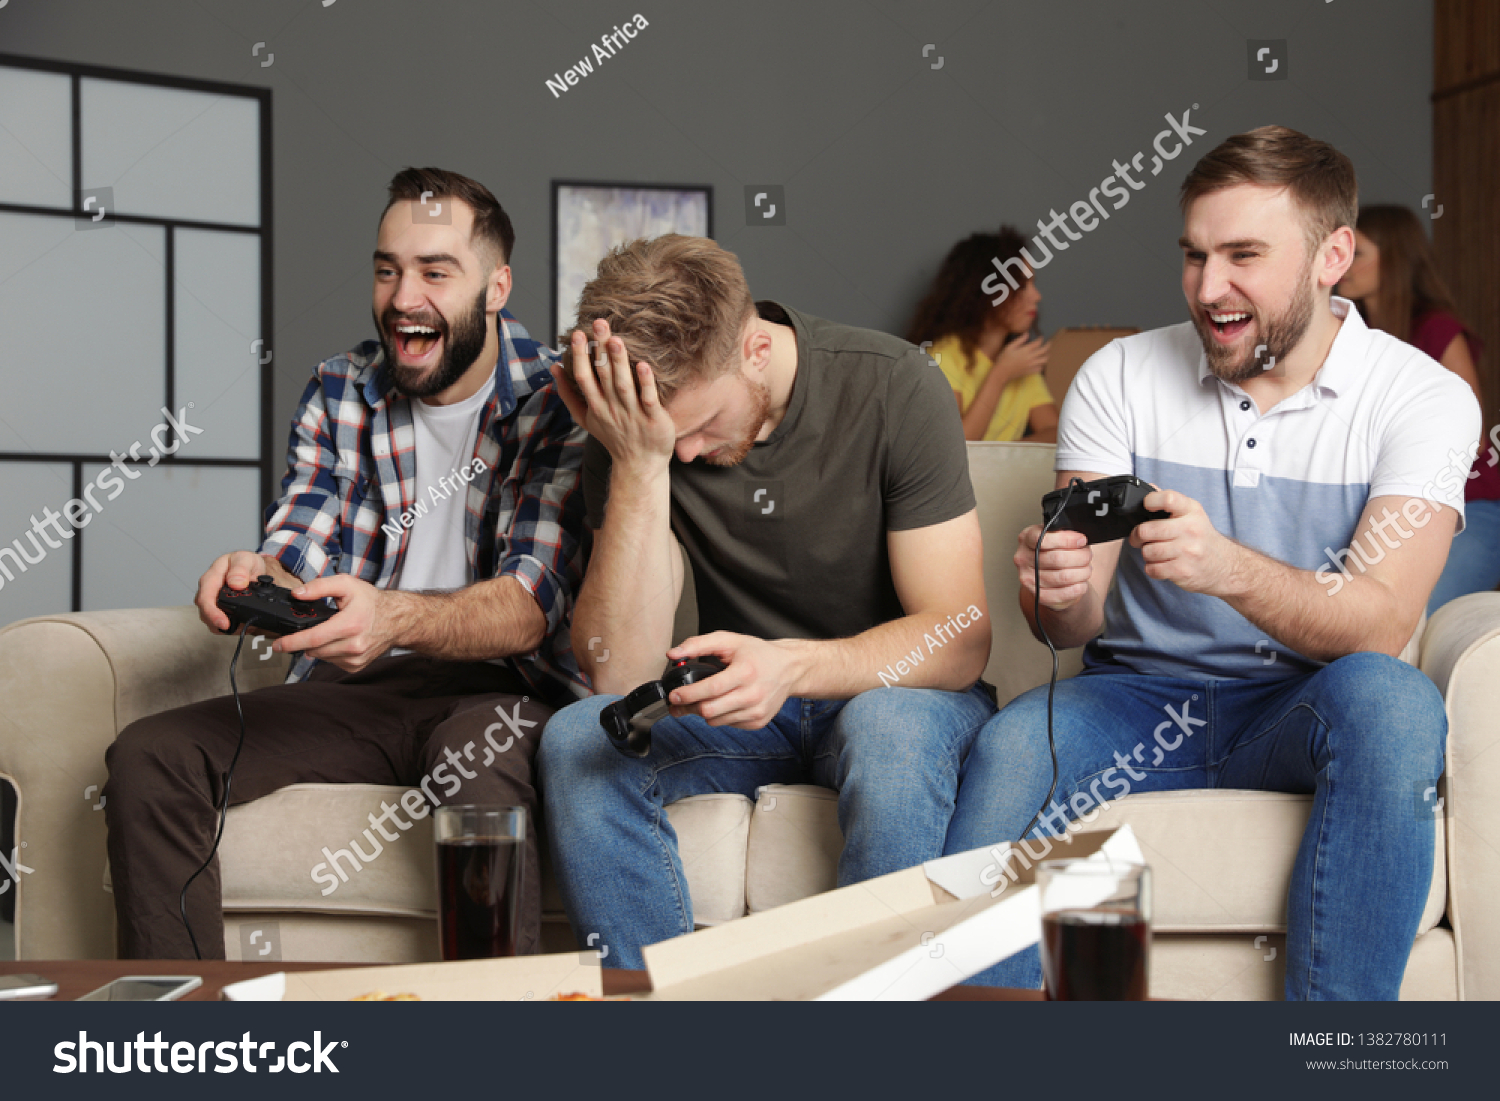 Emotional friends playing video games at home #1382780111